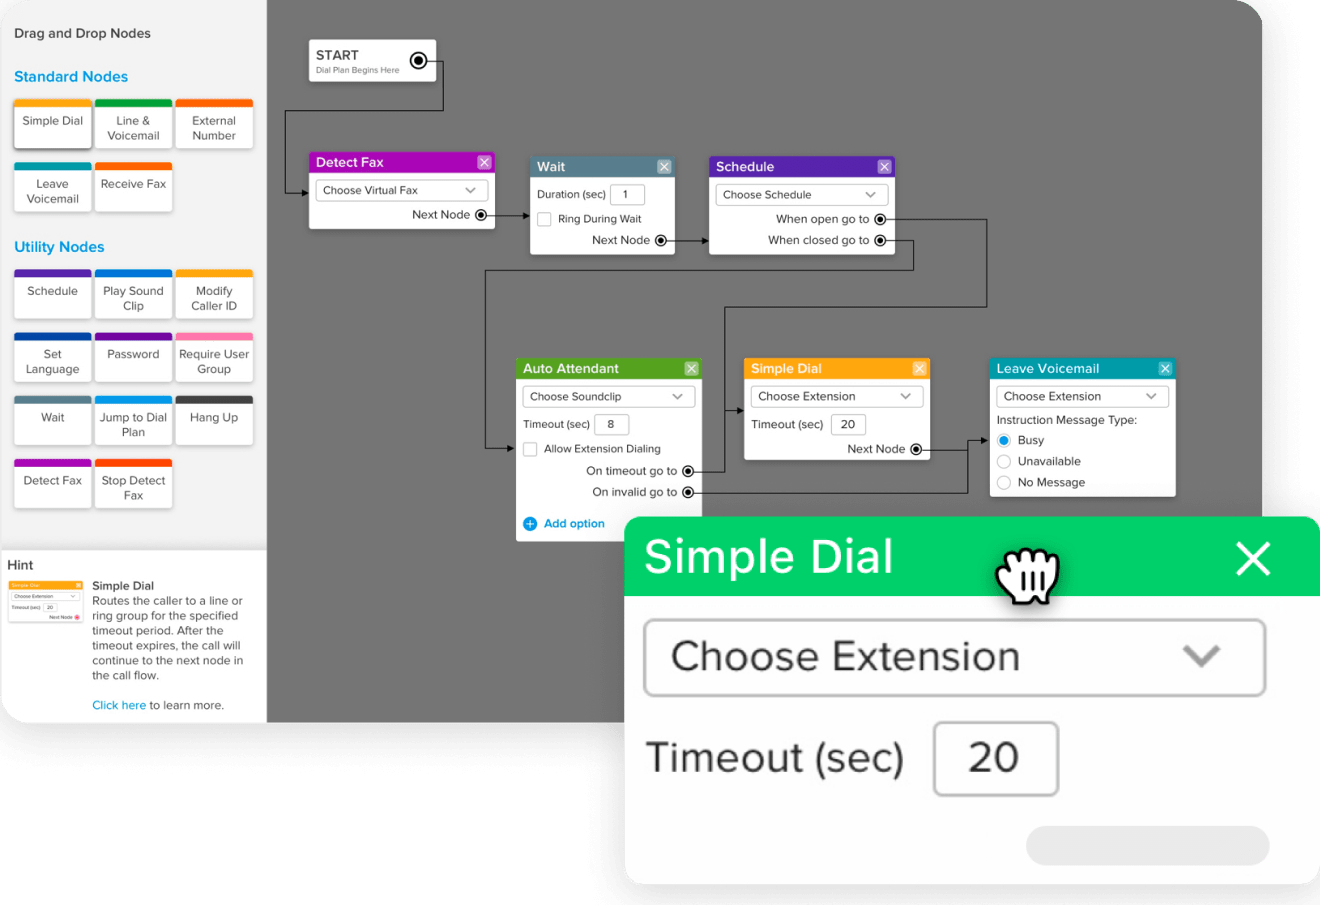 Interface showing GoTo Connect’s easy-to-use, lightweight drag-and-drop dial plan editor.